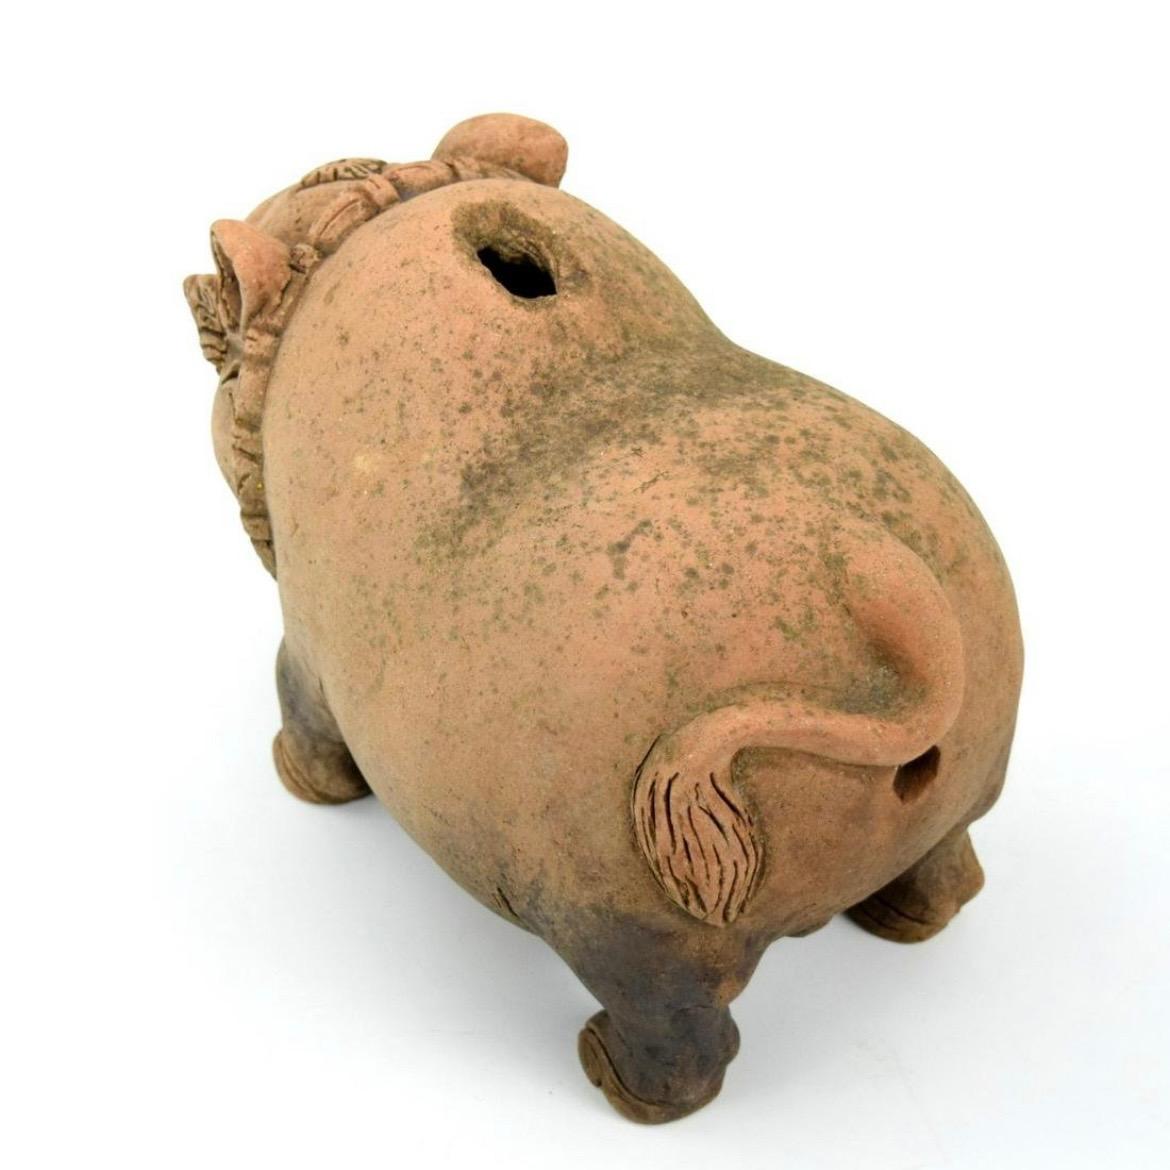 Javanese Clay Terracotta Piggy Bank from the Majapahit Kingdom (1292-1520) In Good Condition For Sale In Point Richmond, CA